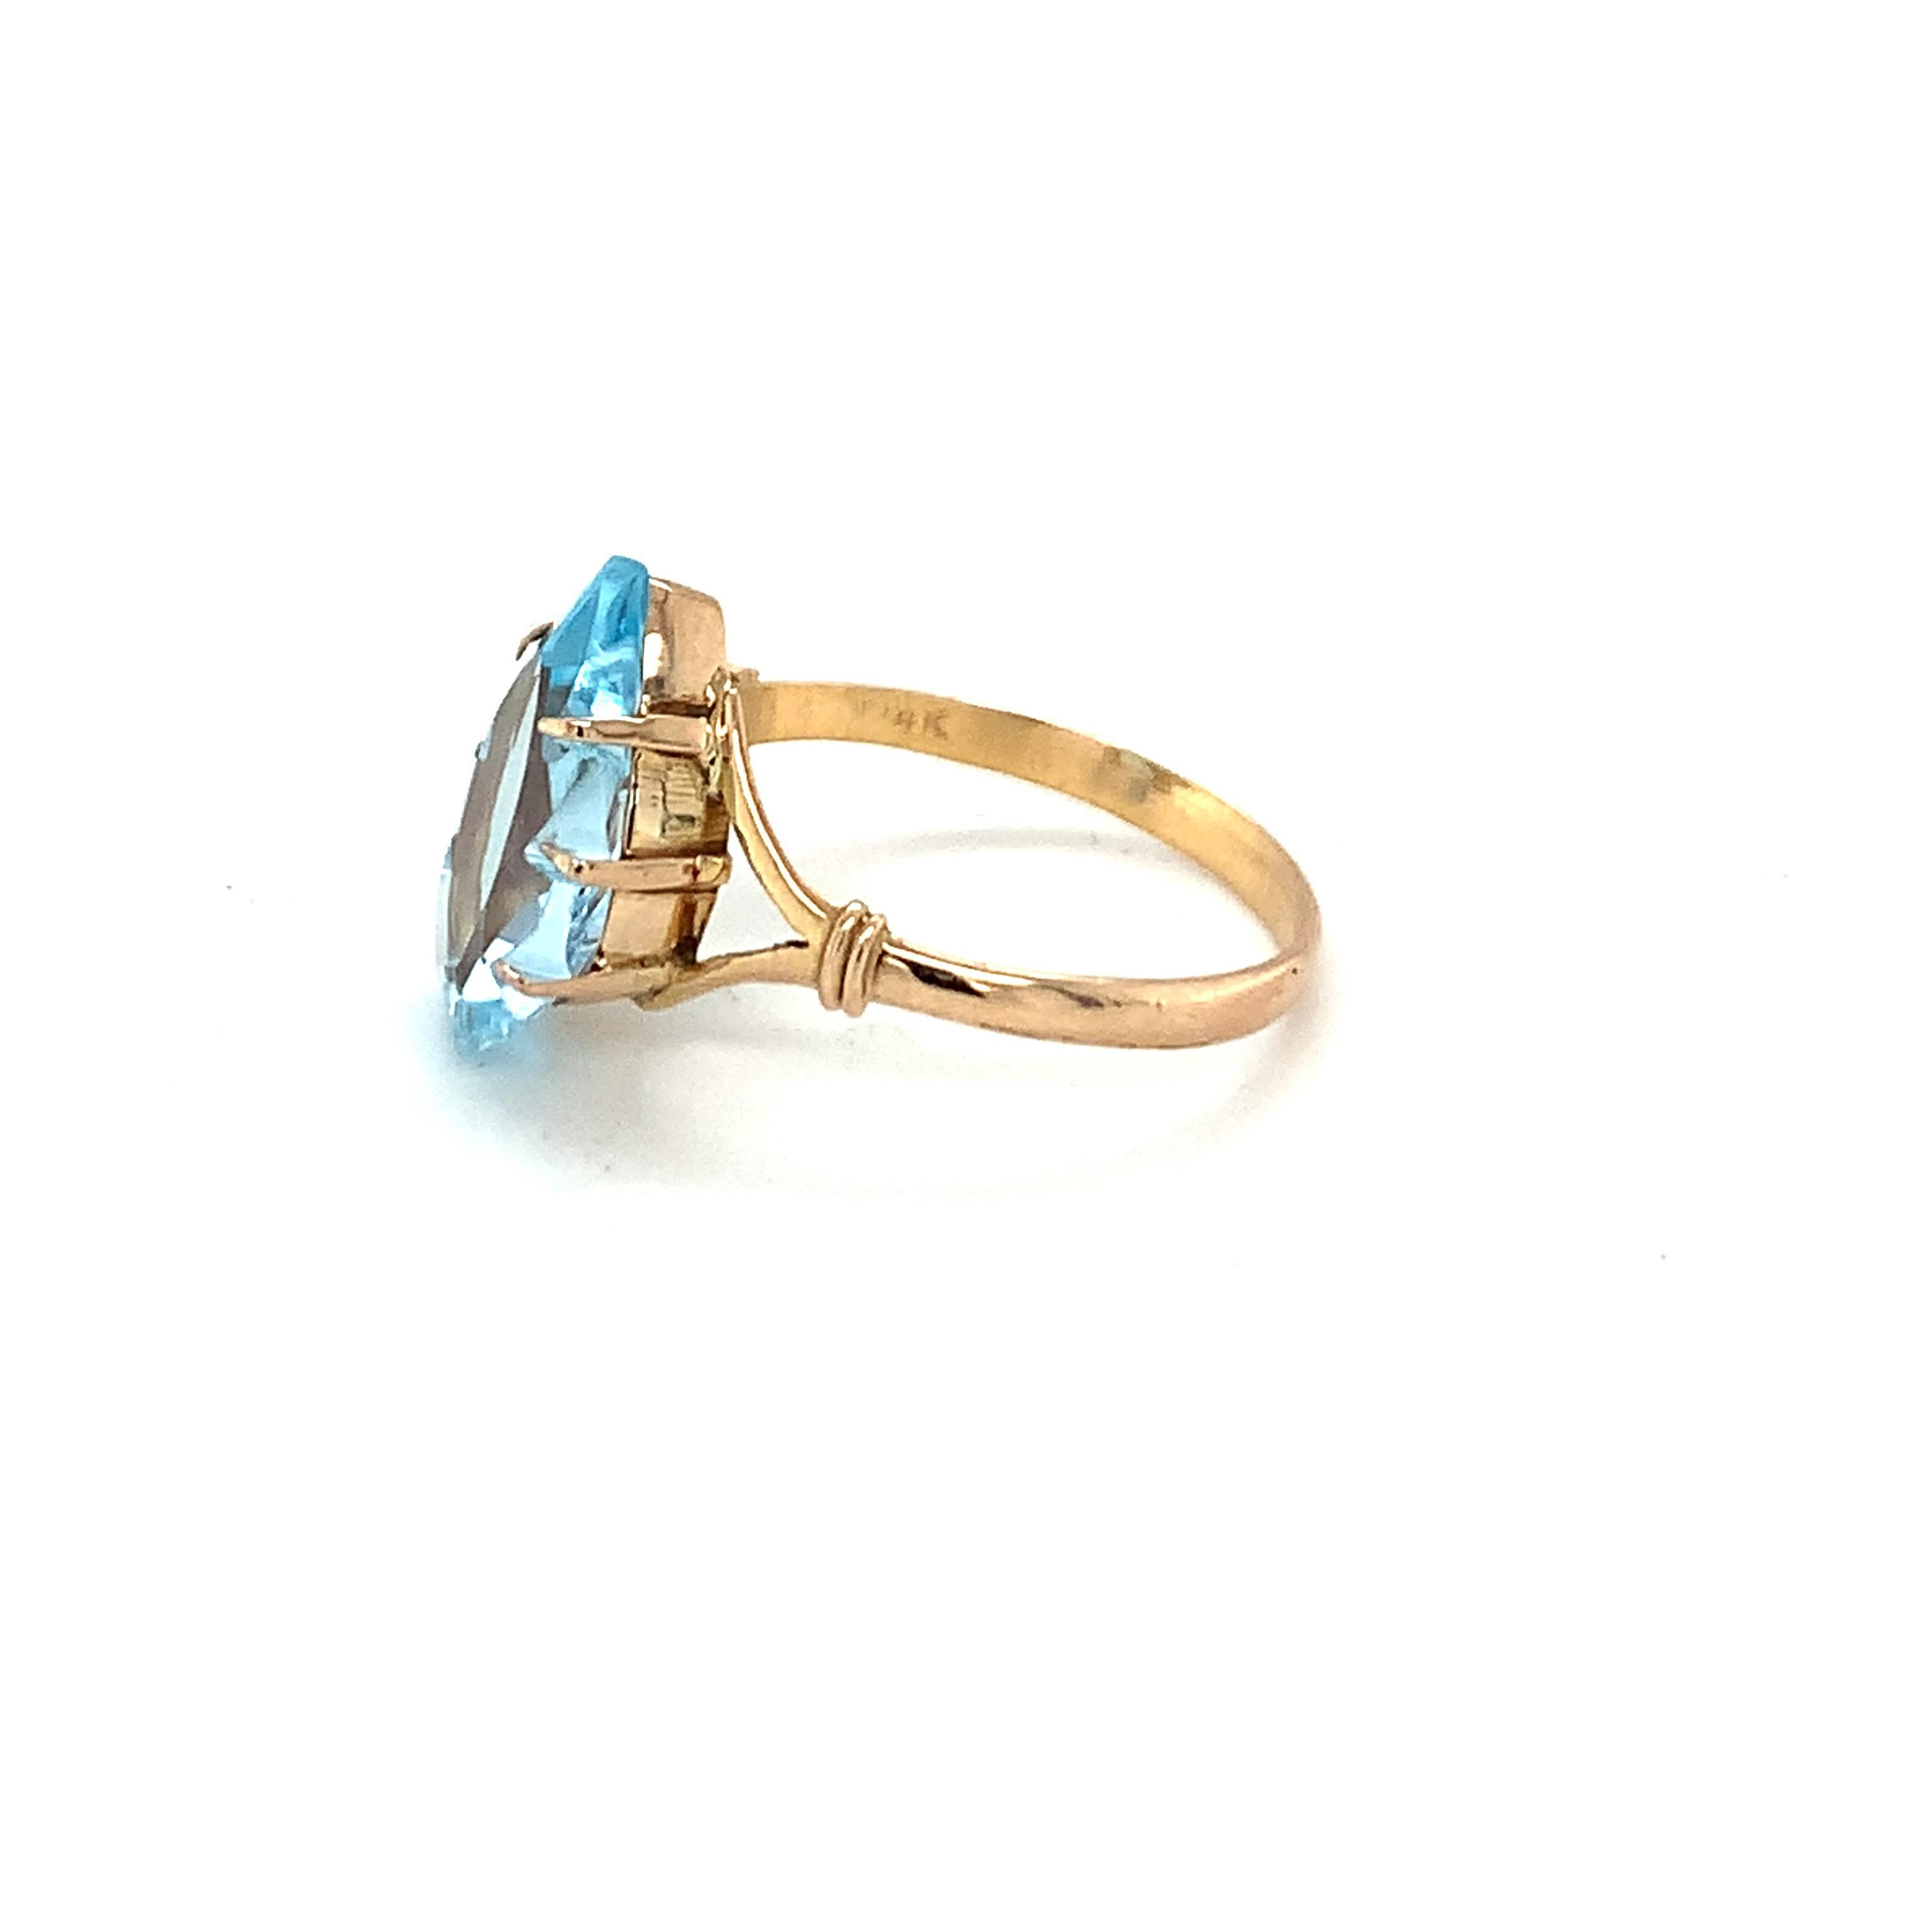 Tear Drop Blue Topaz Ring Set in 14k Yellow Gold For Sale 4